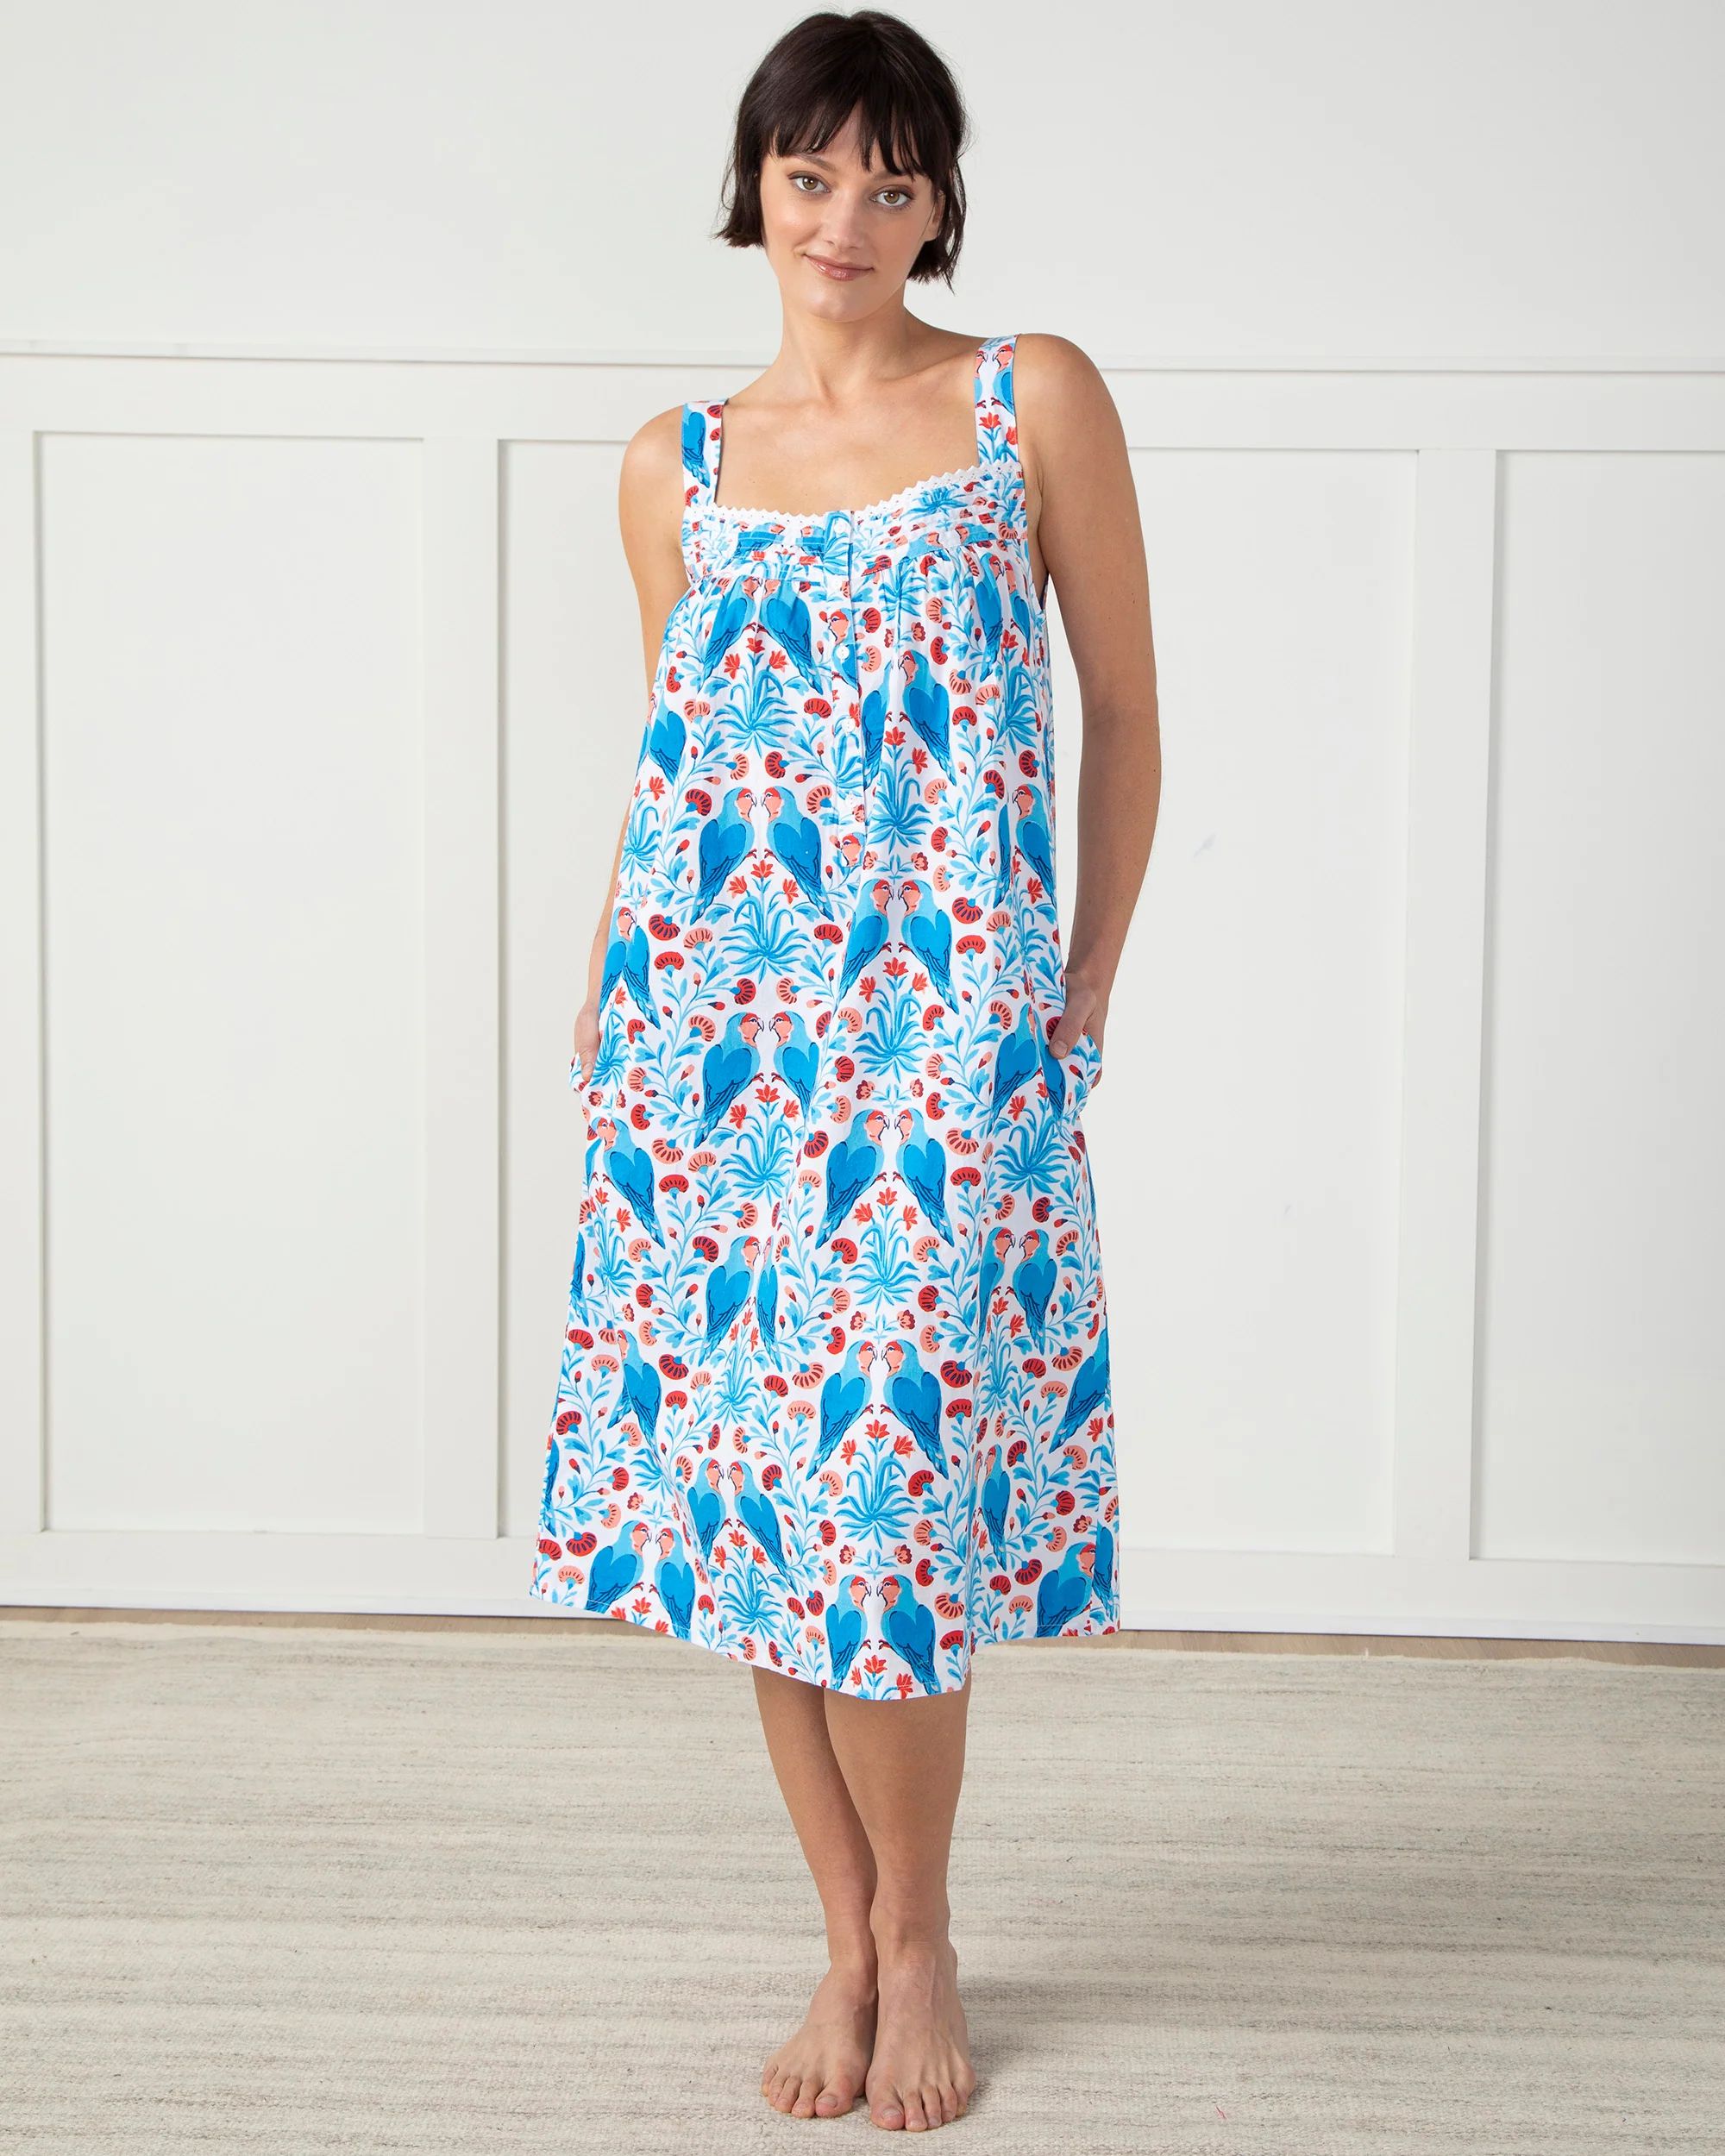 Lovebirds - Back to Bed Nightgown - Blue Cloud | Printfresh